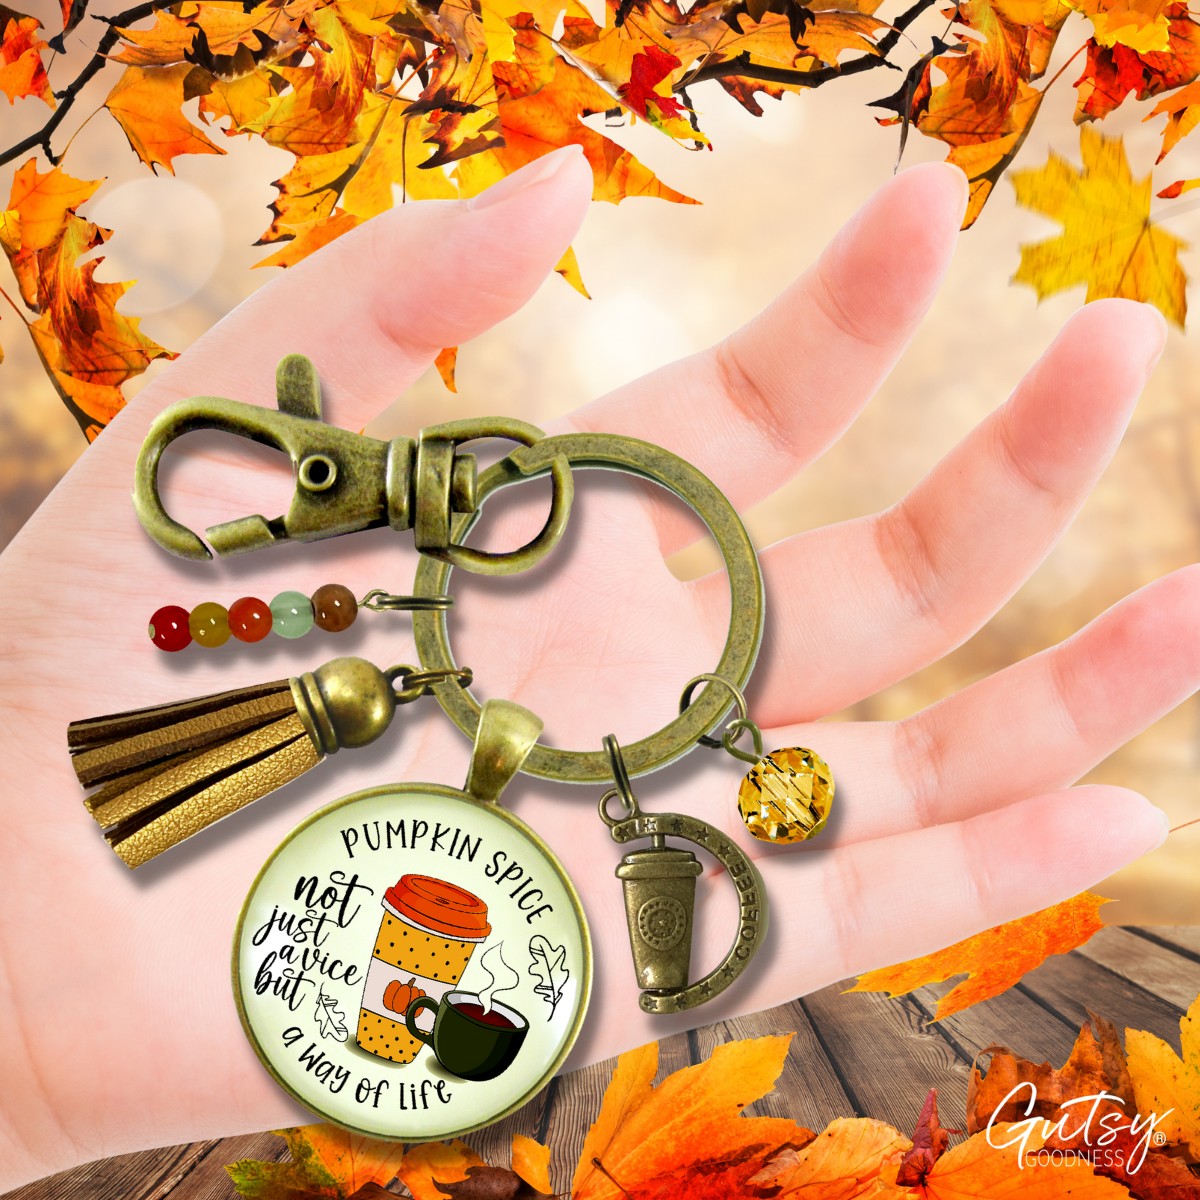 Pumpkin Spice Keychain Funny Quote Not a Vice, Way of Life Autumn PSL Coffee Latte Lover Costume Fashion Fall Jewelry For Women  Keychain - Women - Gutsy Goodness Handmade Jewelry